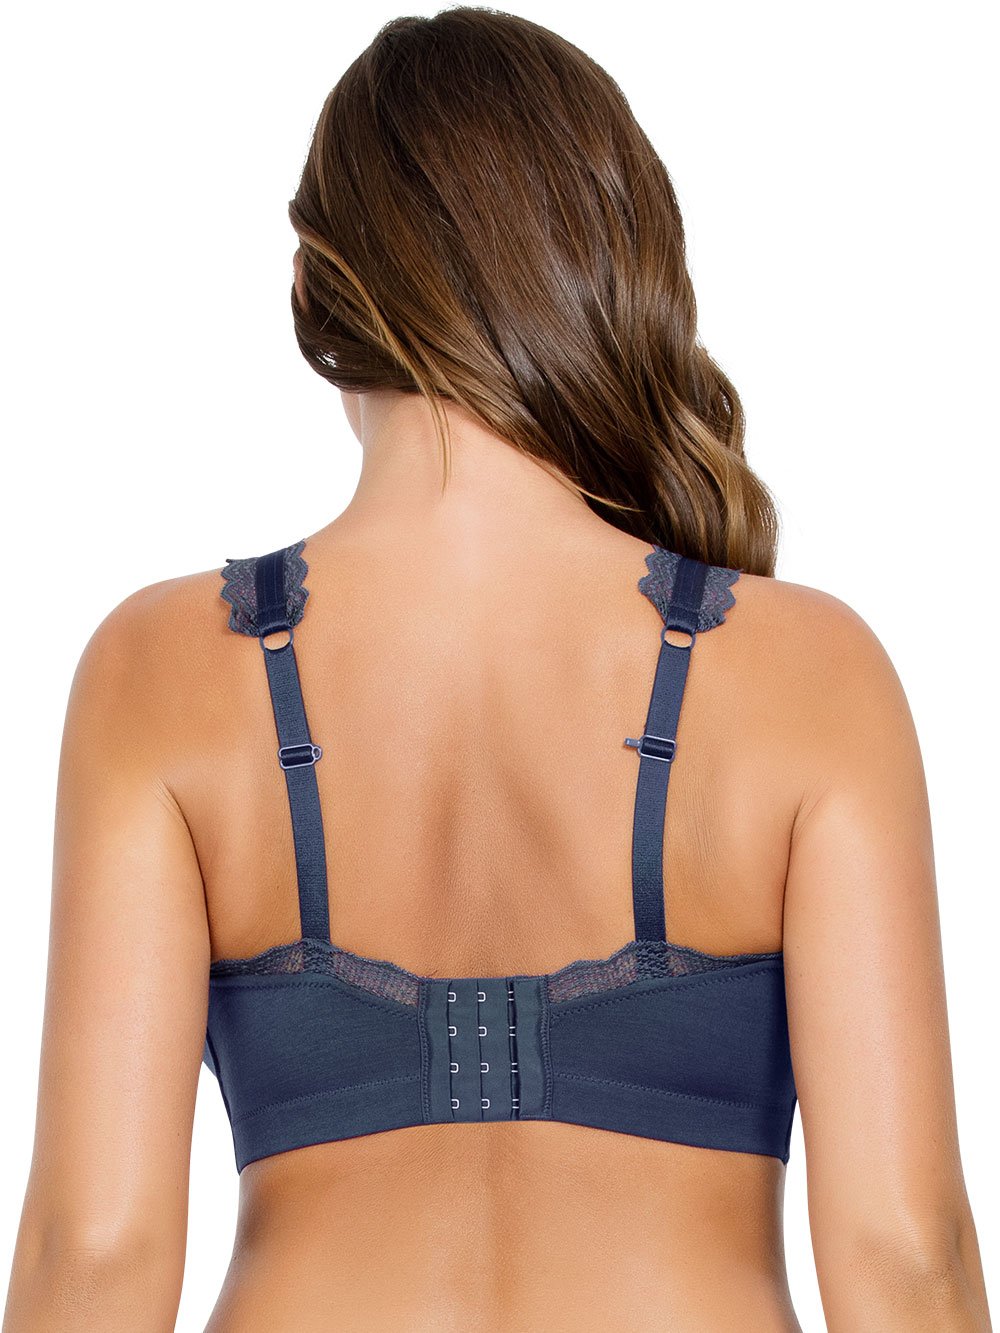 32C Bras: Bra Cup Size for 32C Boobs and Breast Size Tagged Sexy Sports Bra  - HauteFlair